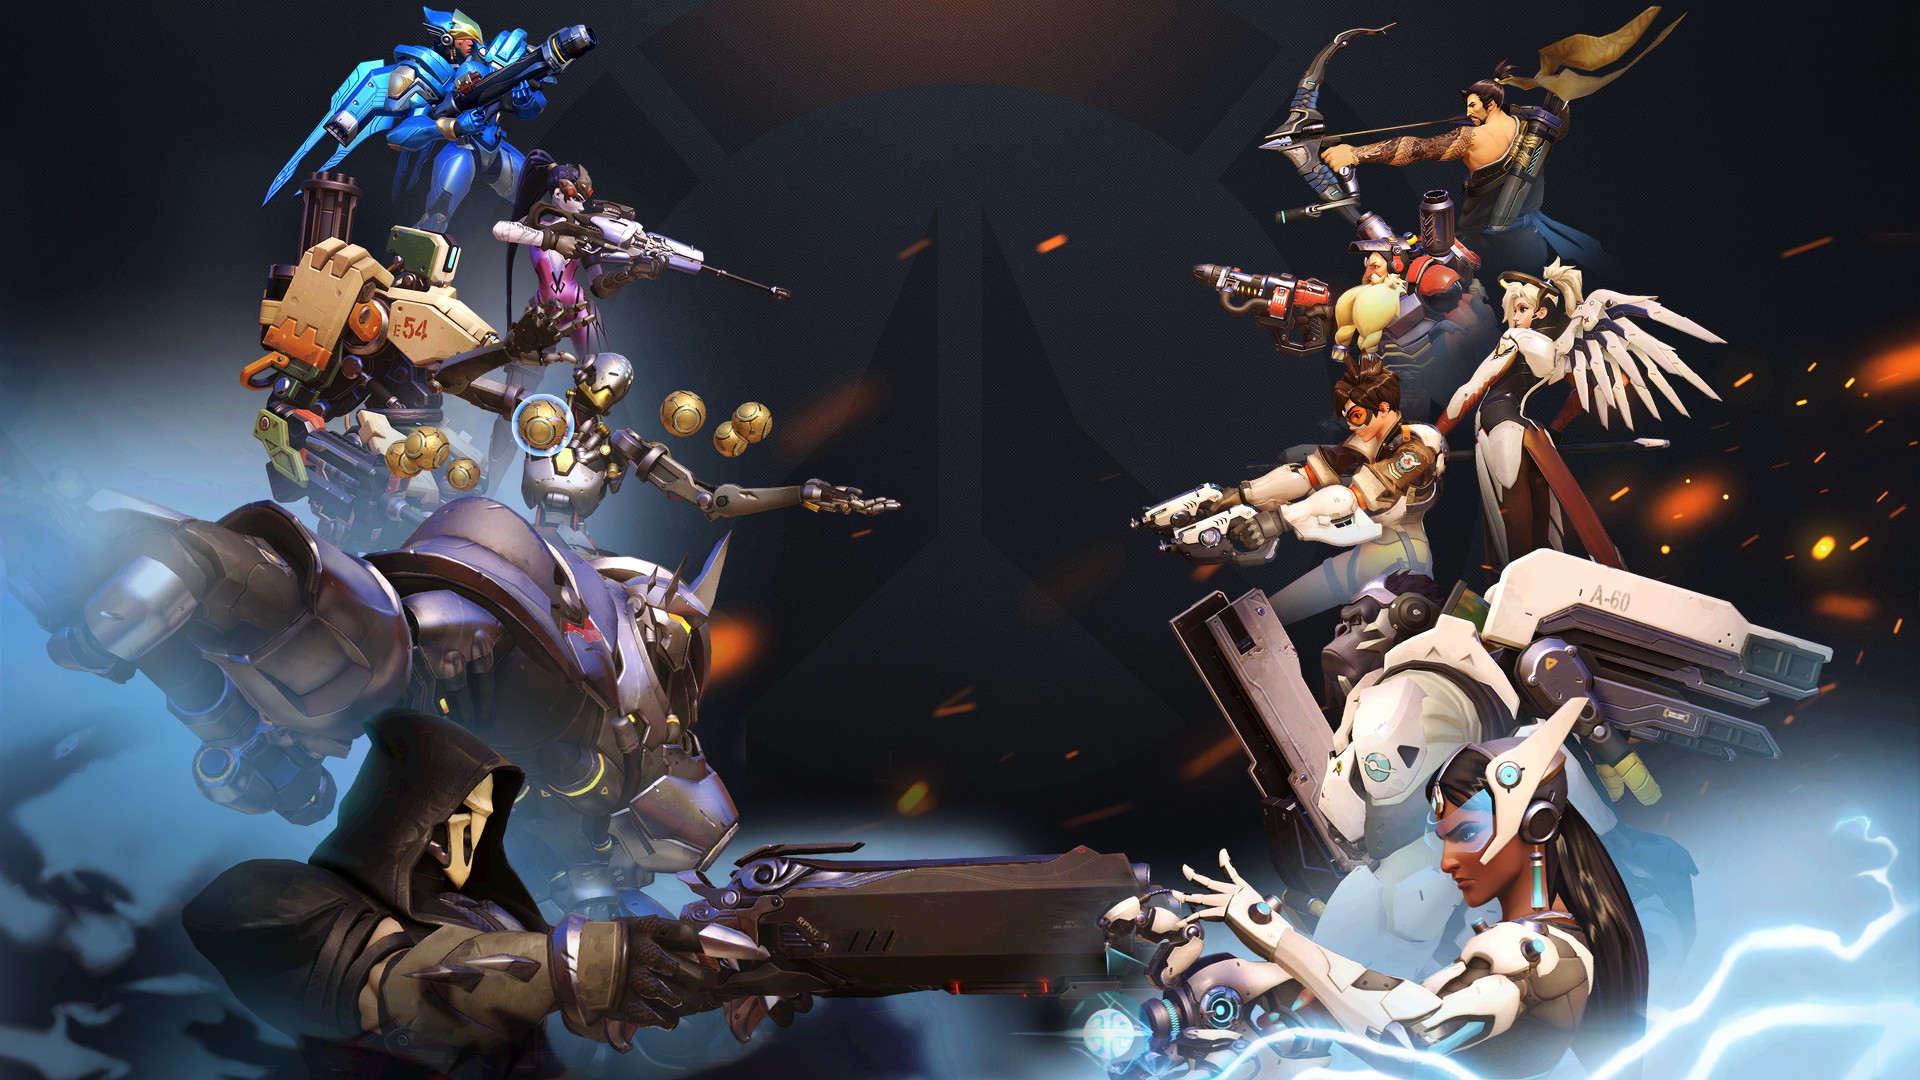 Overwatch wallpaper 1080p ·① Download free cool High ...
